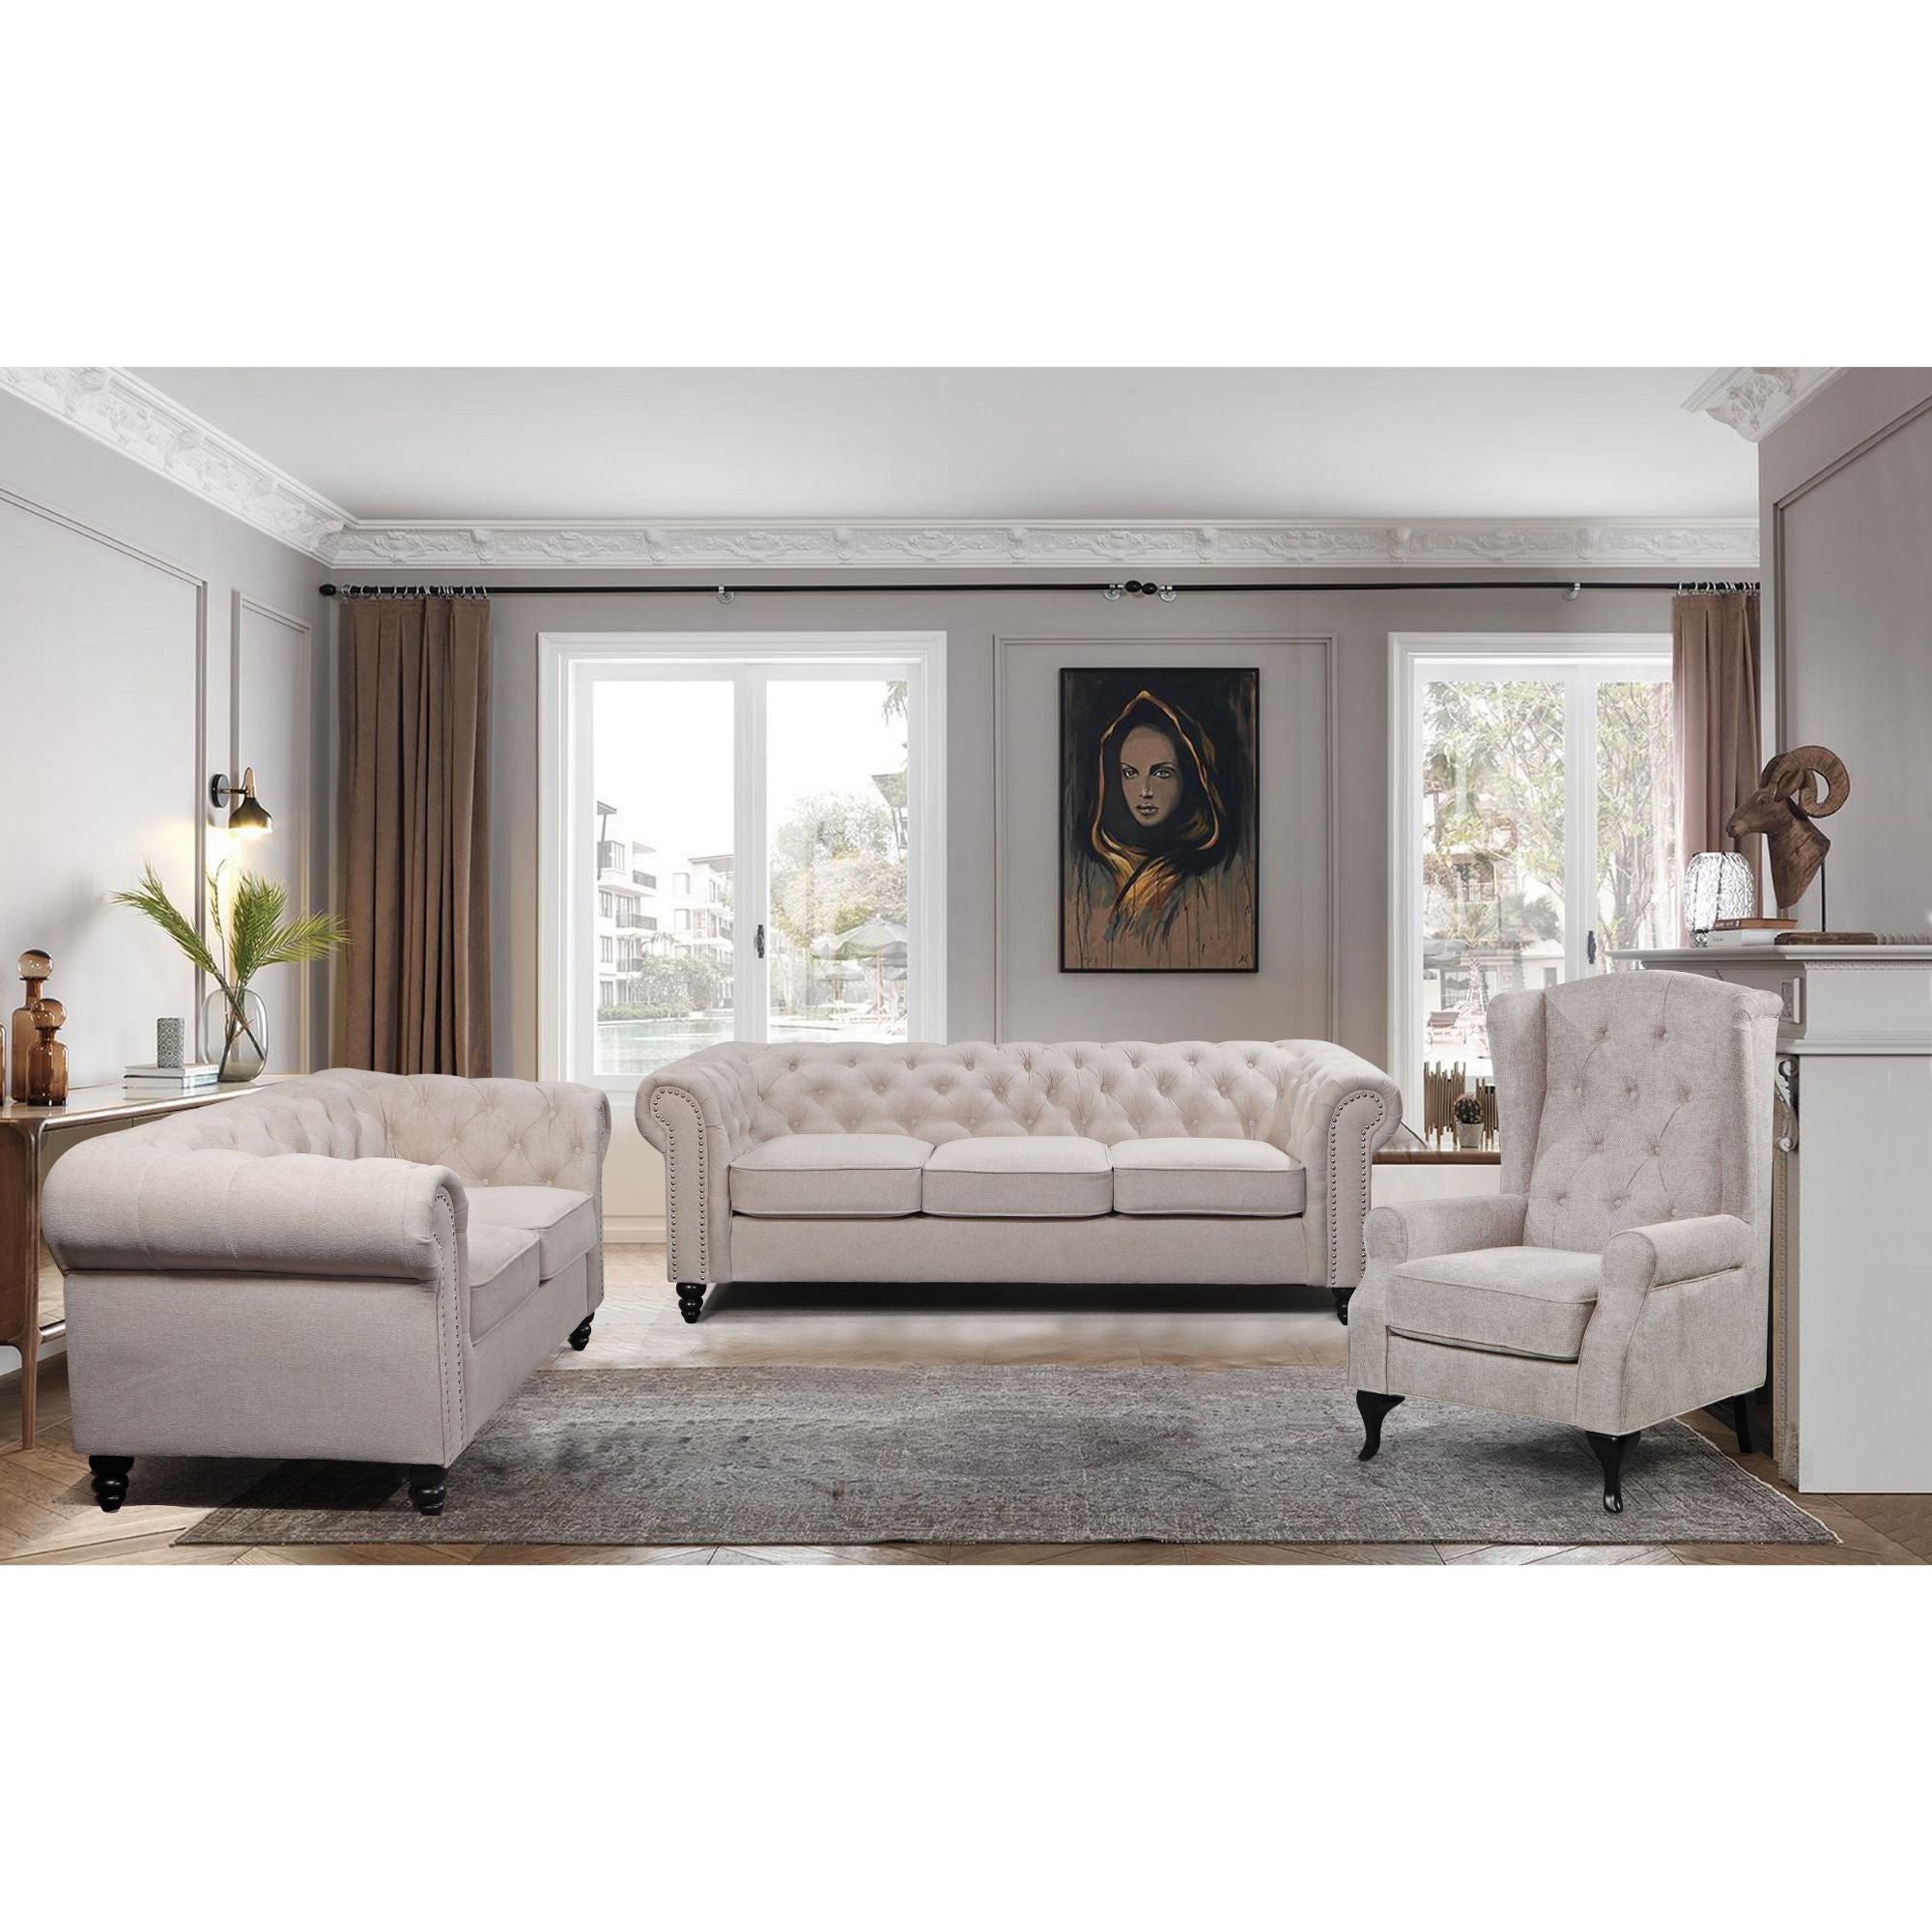 Mellowly 3 + 2 Seater Sofa Fabric Uplholstered Chesterfield Lounge Couch - Beige - 0